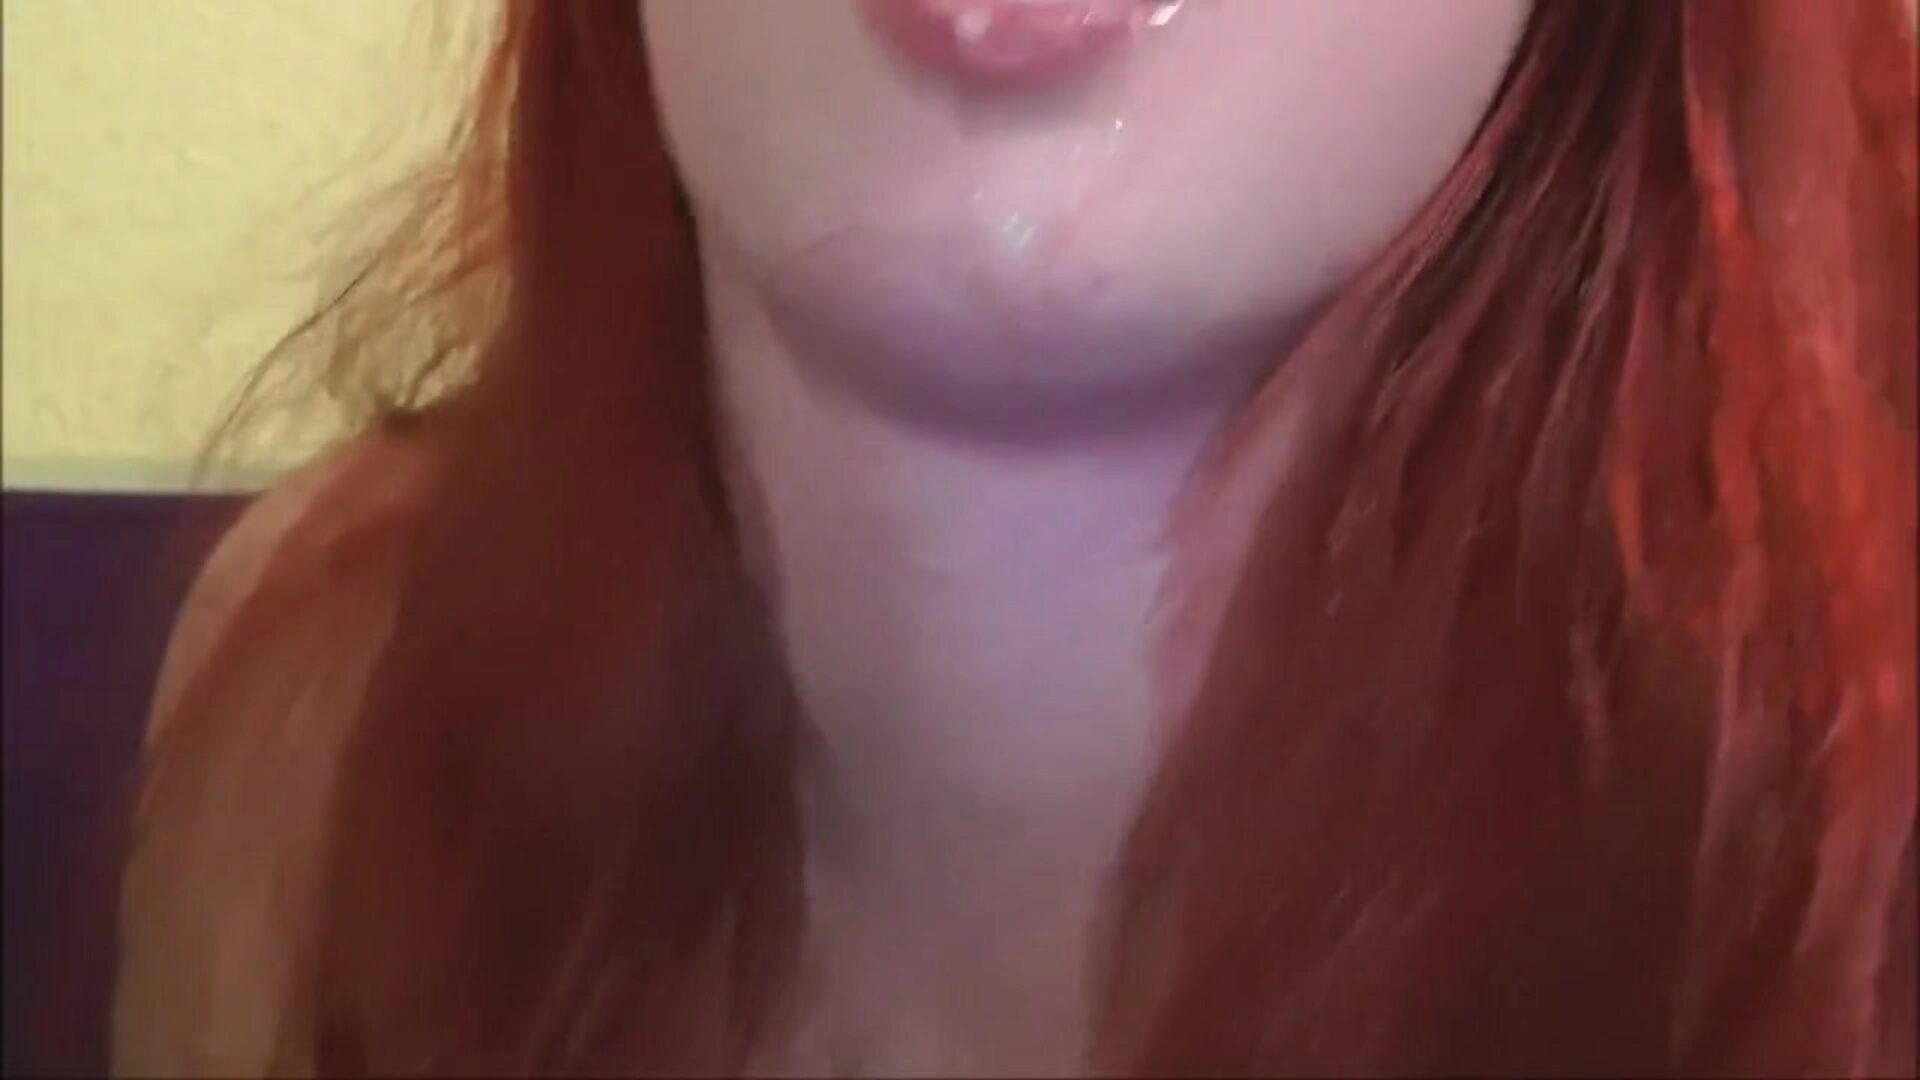 Red Head Cum Play after Blowjob